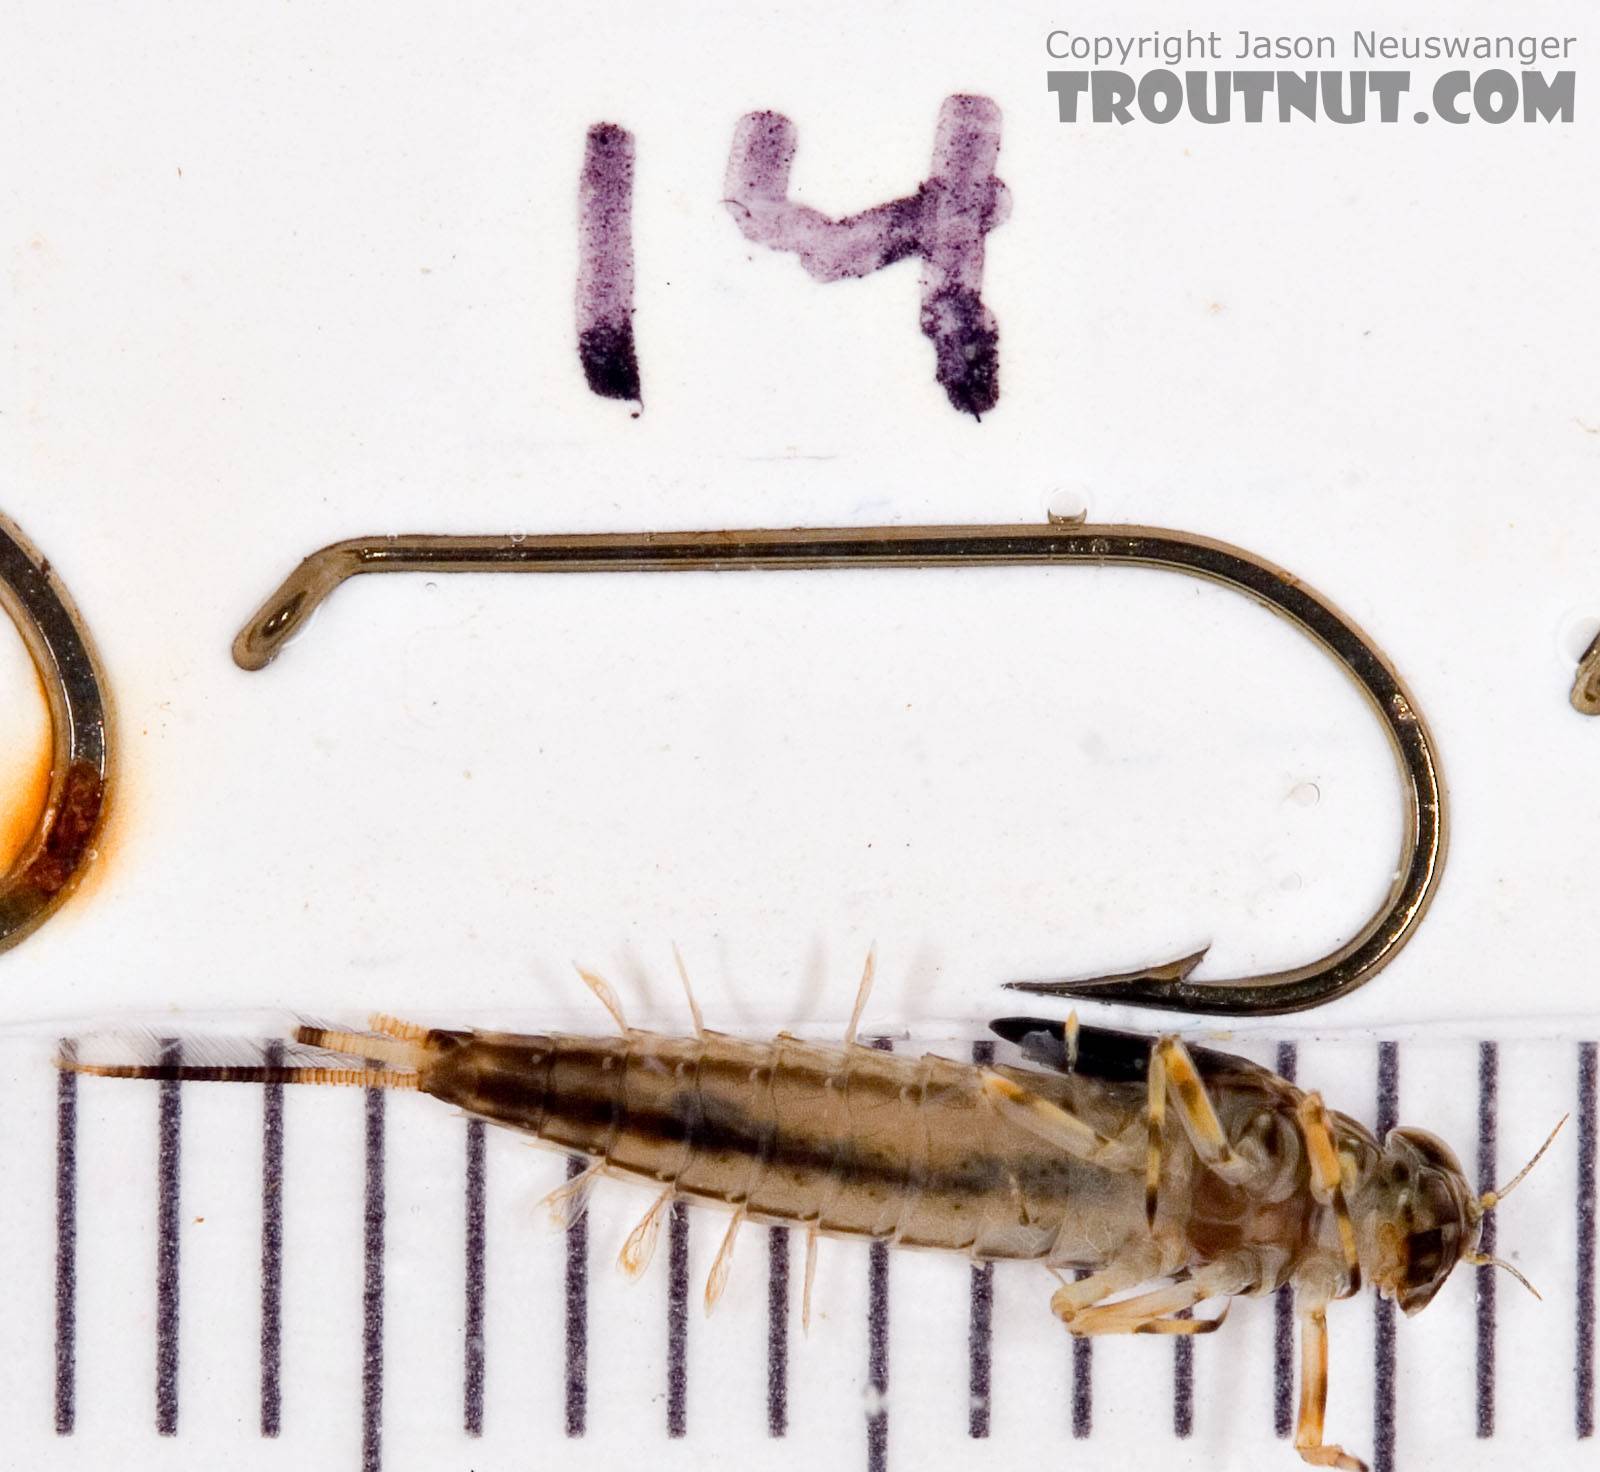 Ameletus ludens (Brown Dun) Mayfly Nymph from Mongaup Creek in New York